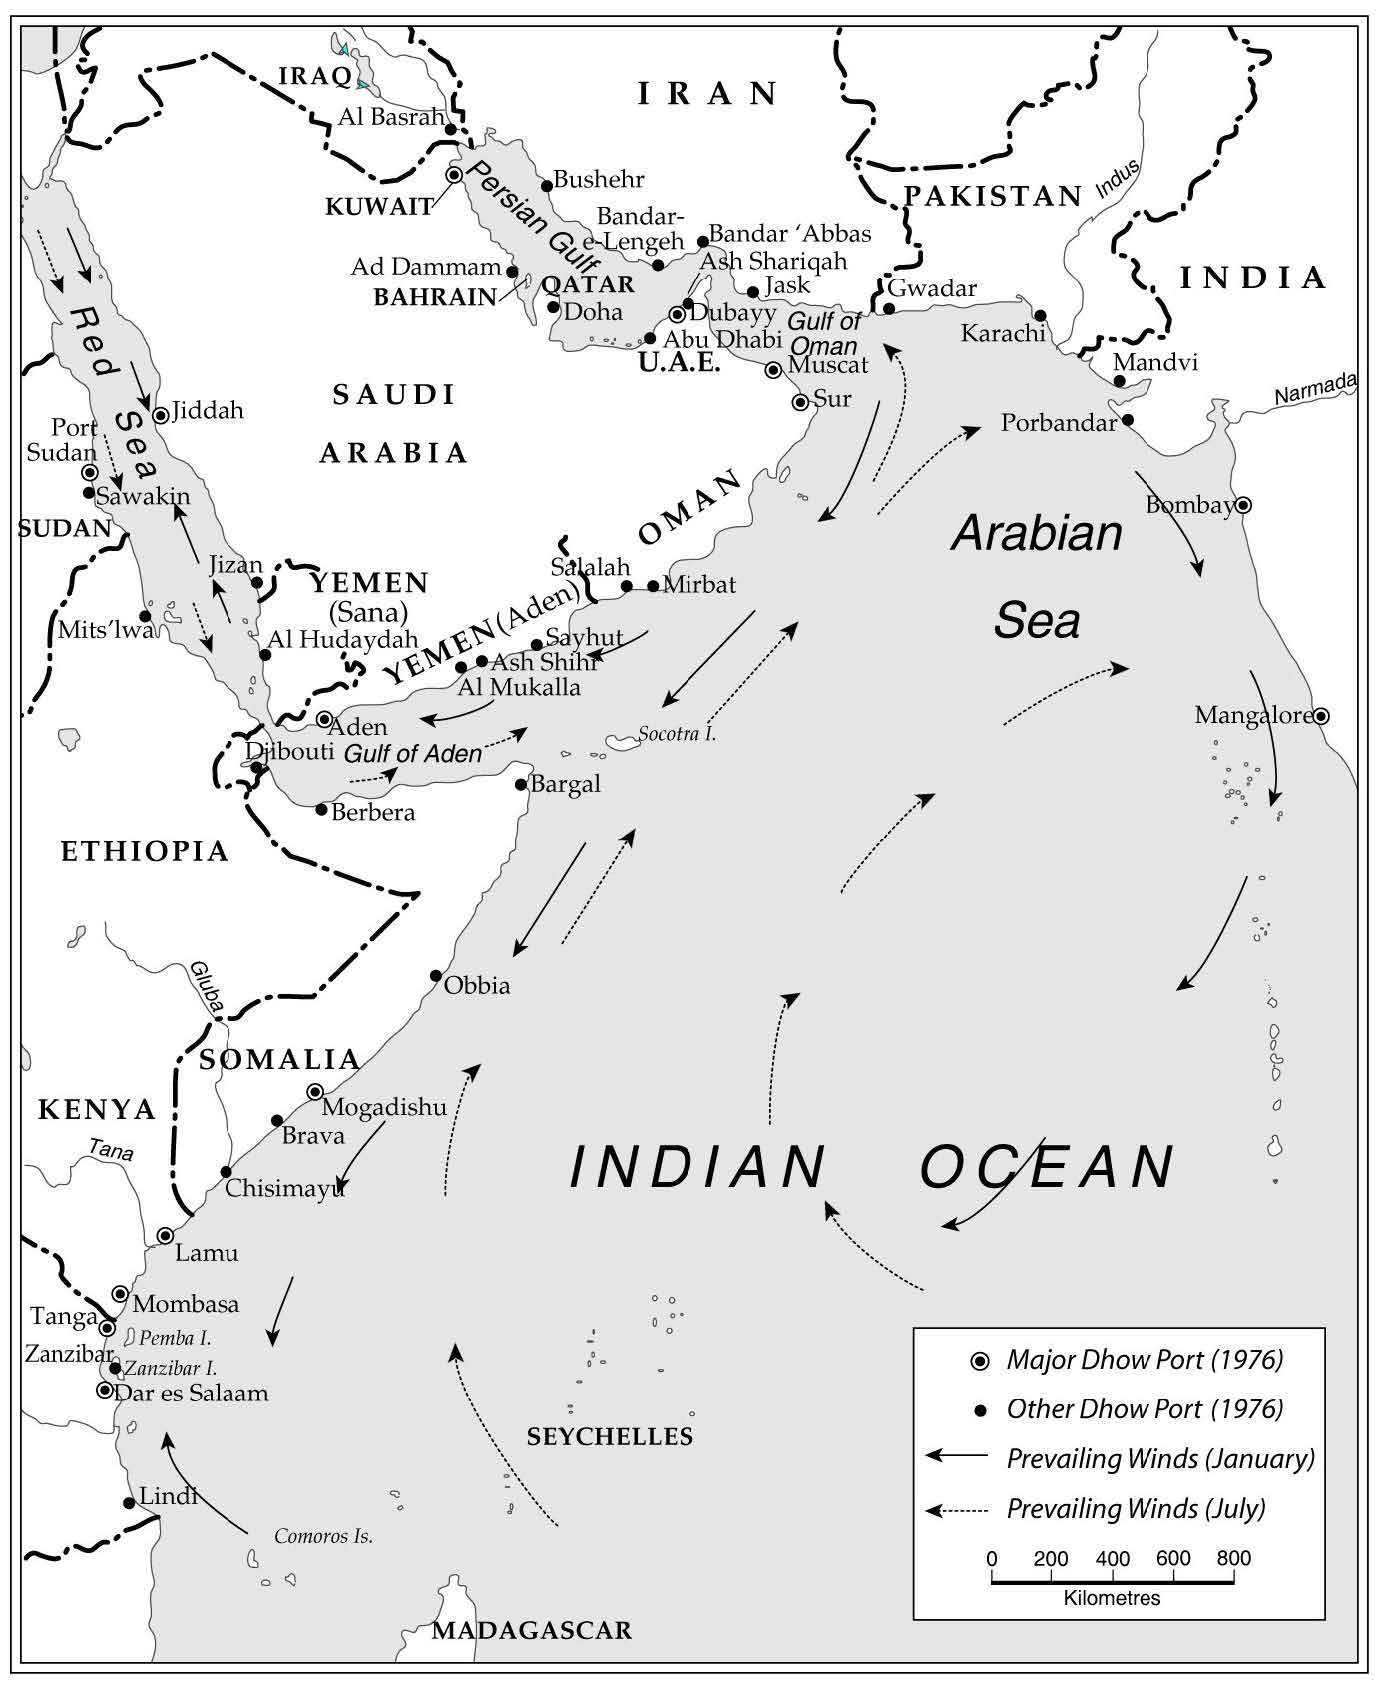 map-of-dhow-ports-western-indian-ocean.jpg#asset:6264